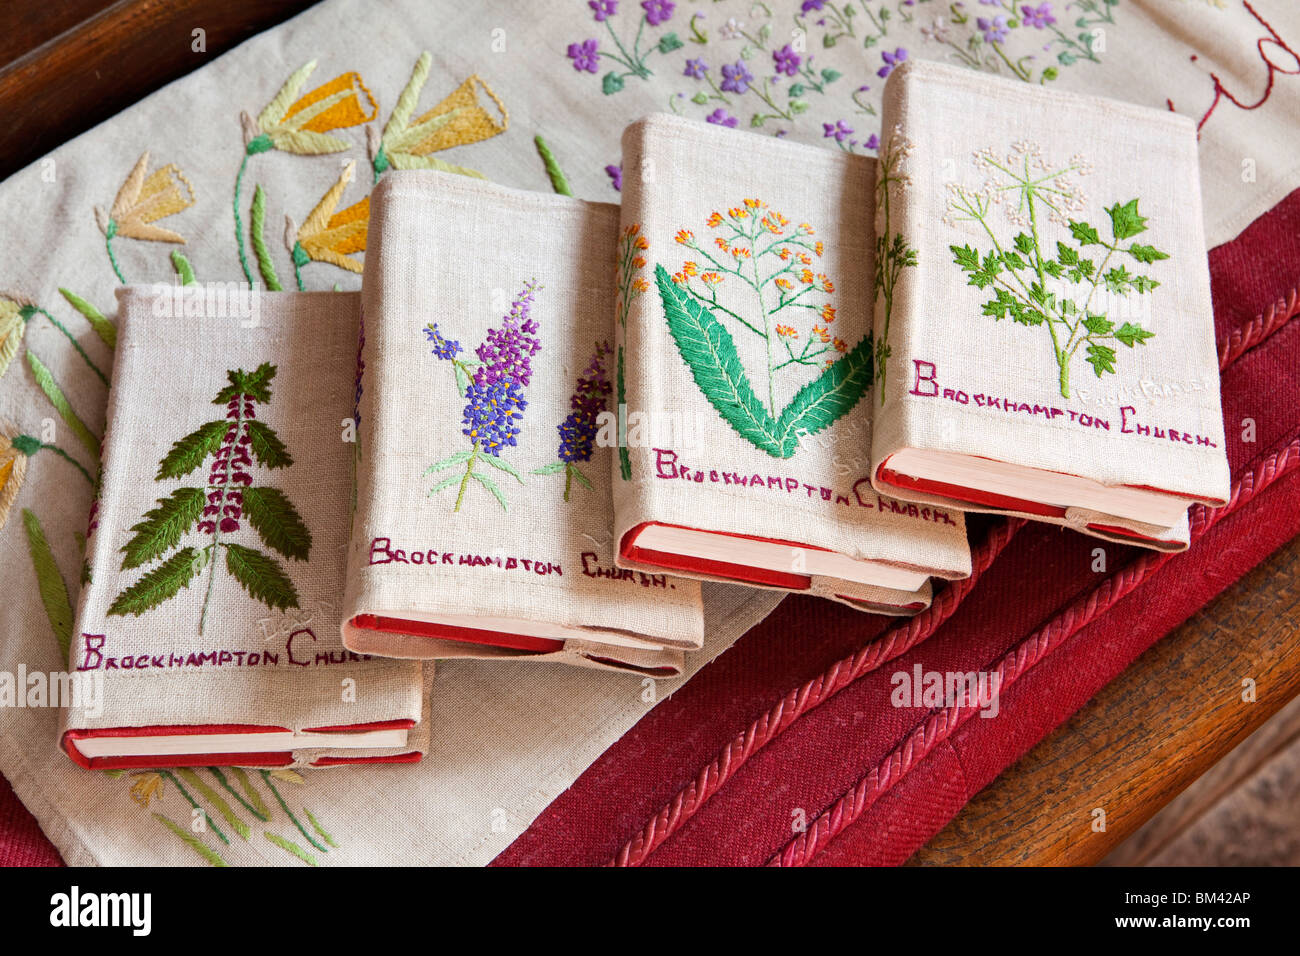 UK, Herefordshire, Brockhampton, All Saints Arts and Crafts Church, interior, embroidered hymn books Stock Photo